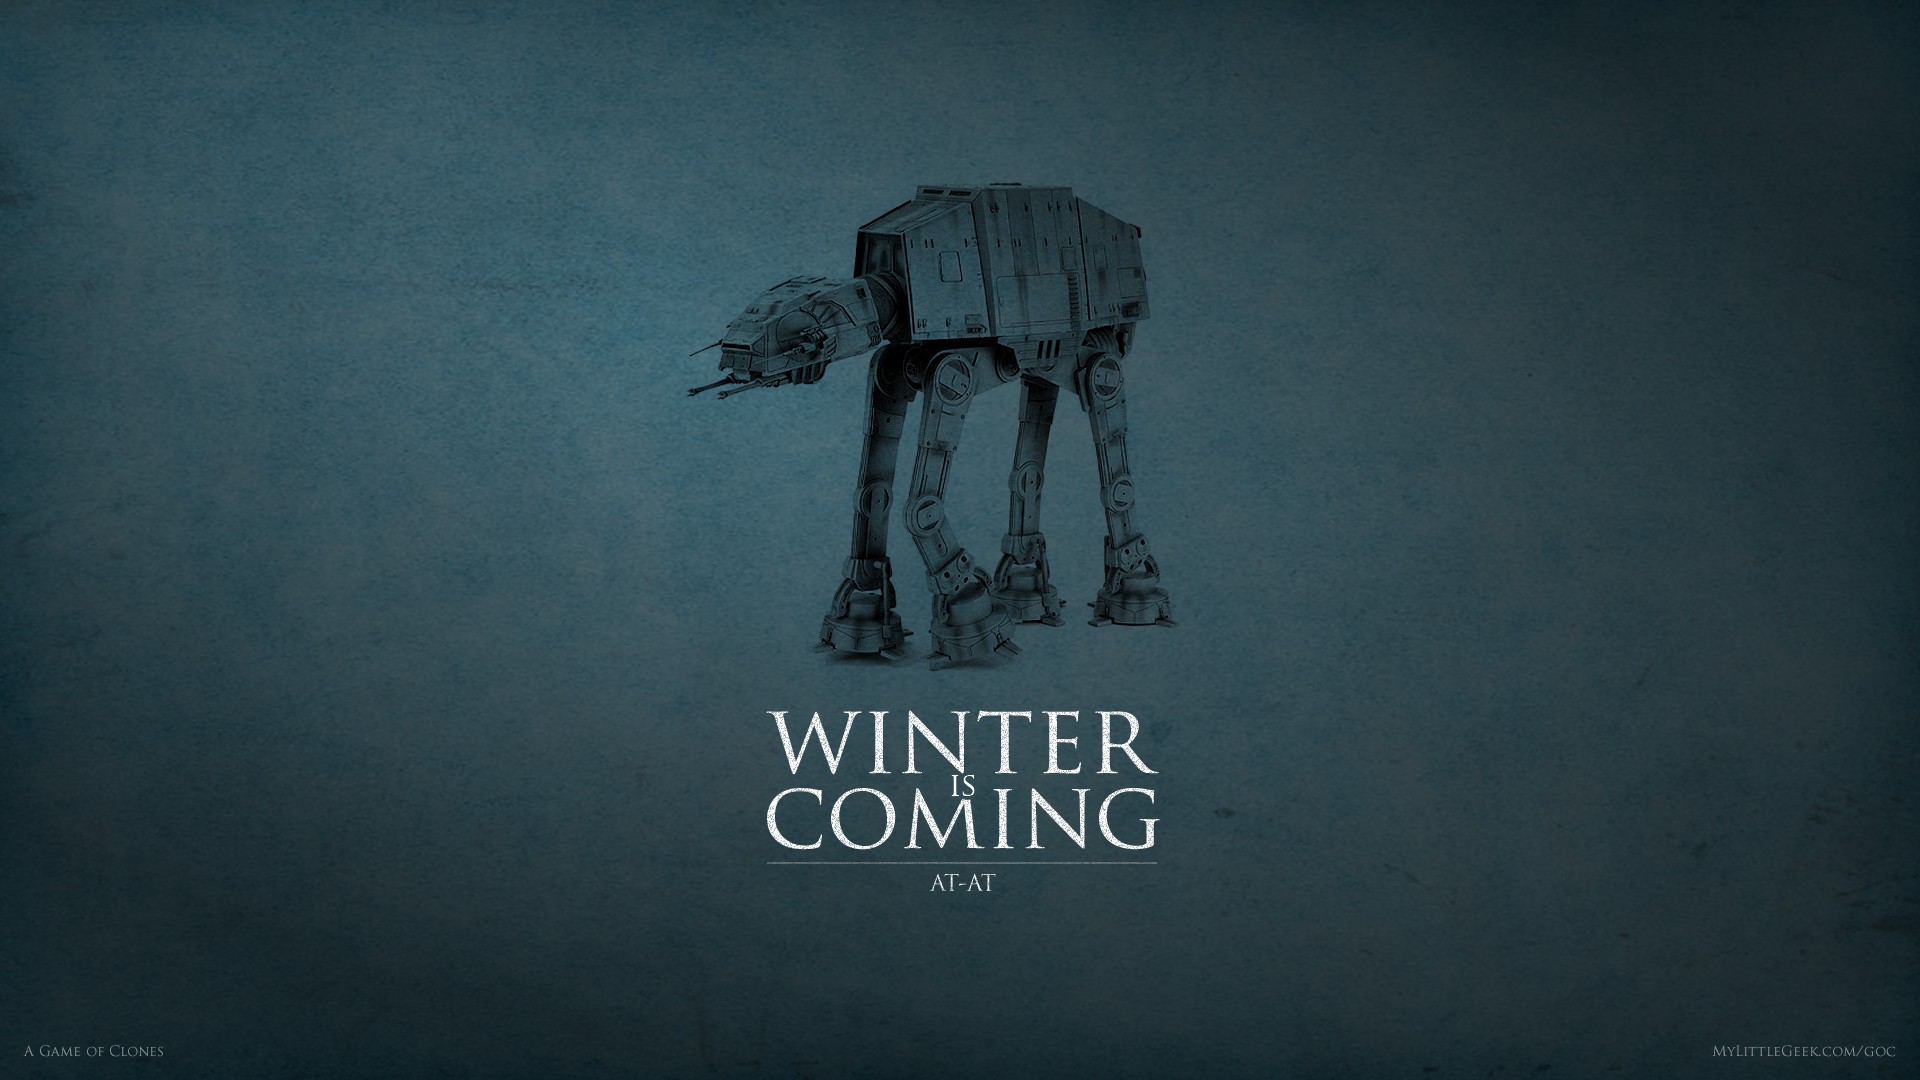 House Stark, Star Wars, AT AT, Game Of Thrones, Crossover, A Song Of Ice And Fire, Winter Is Coming Wallpaper